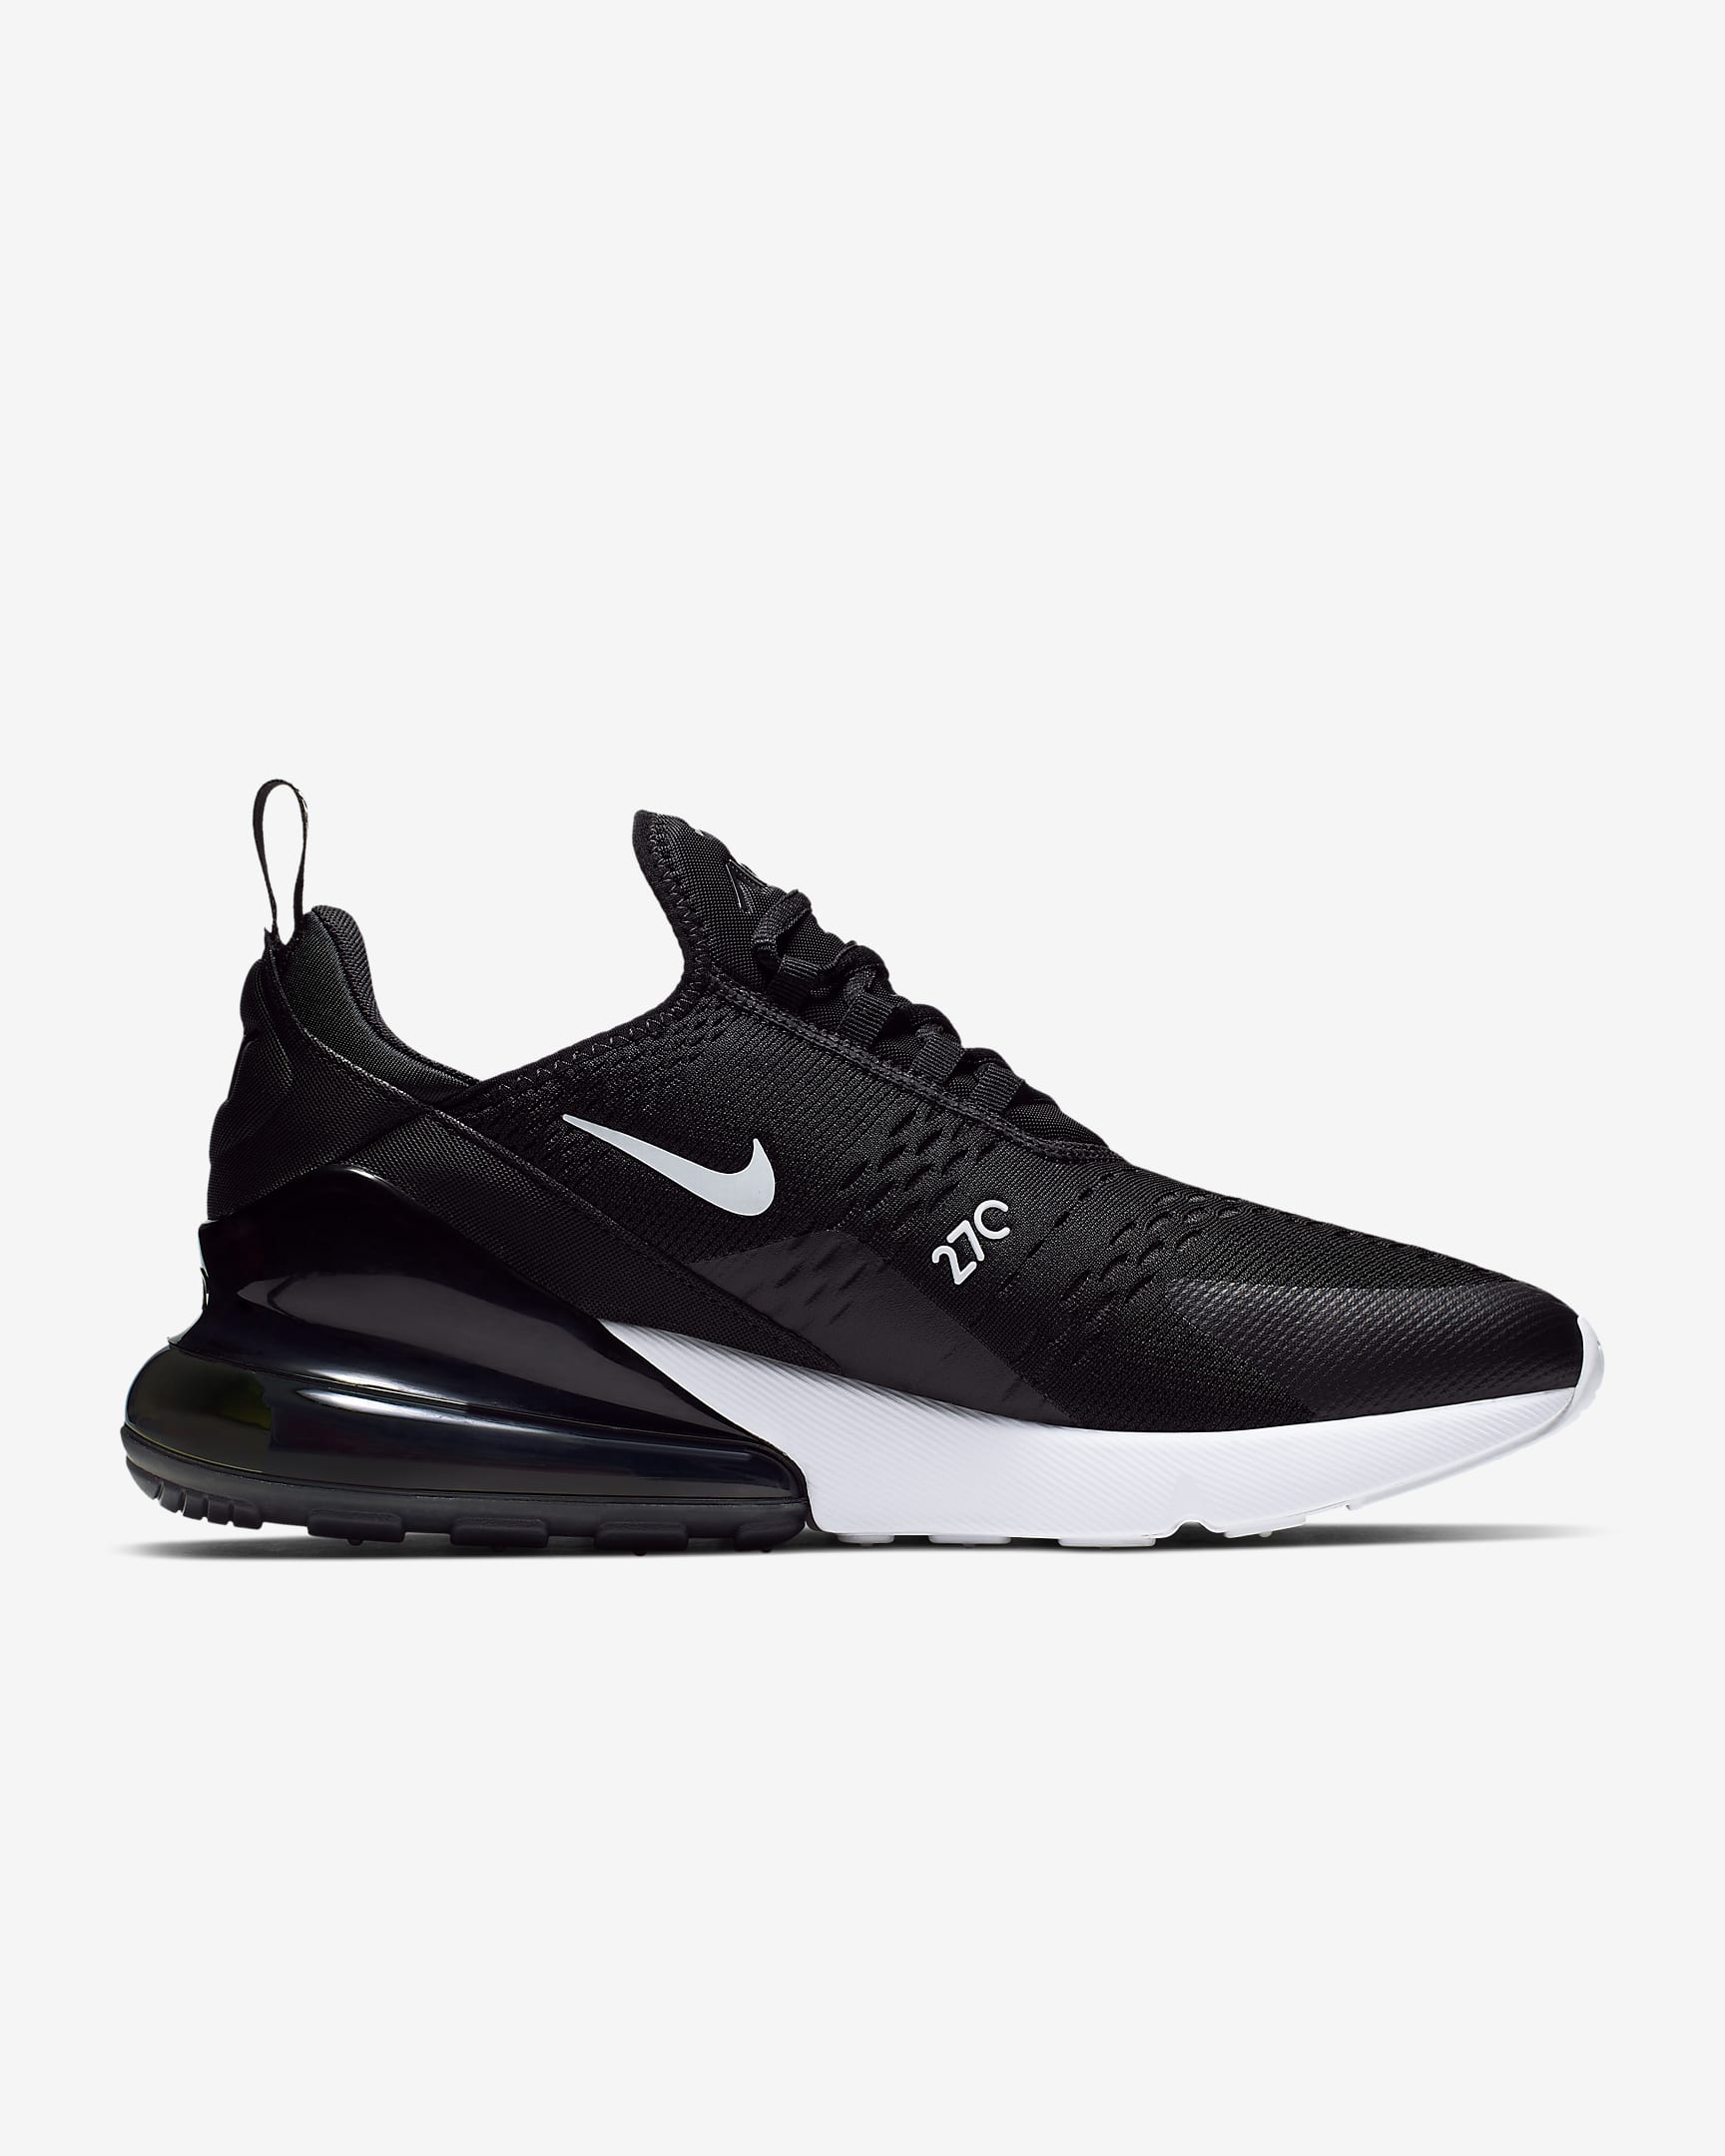 Nike Air Max 270 Men's Shoes - Black/White/Solar Red/Anthracite